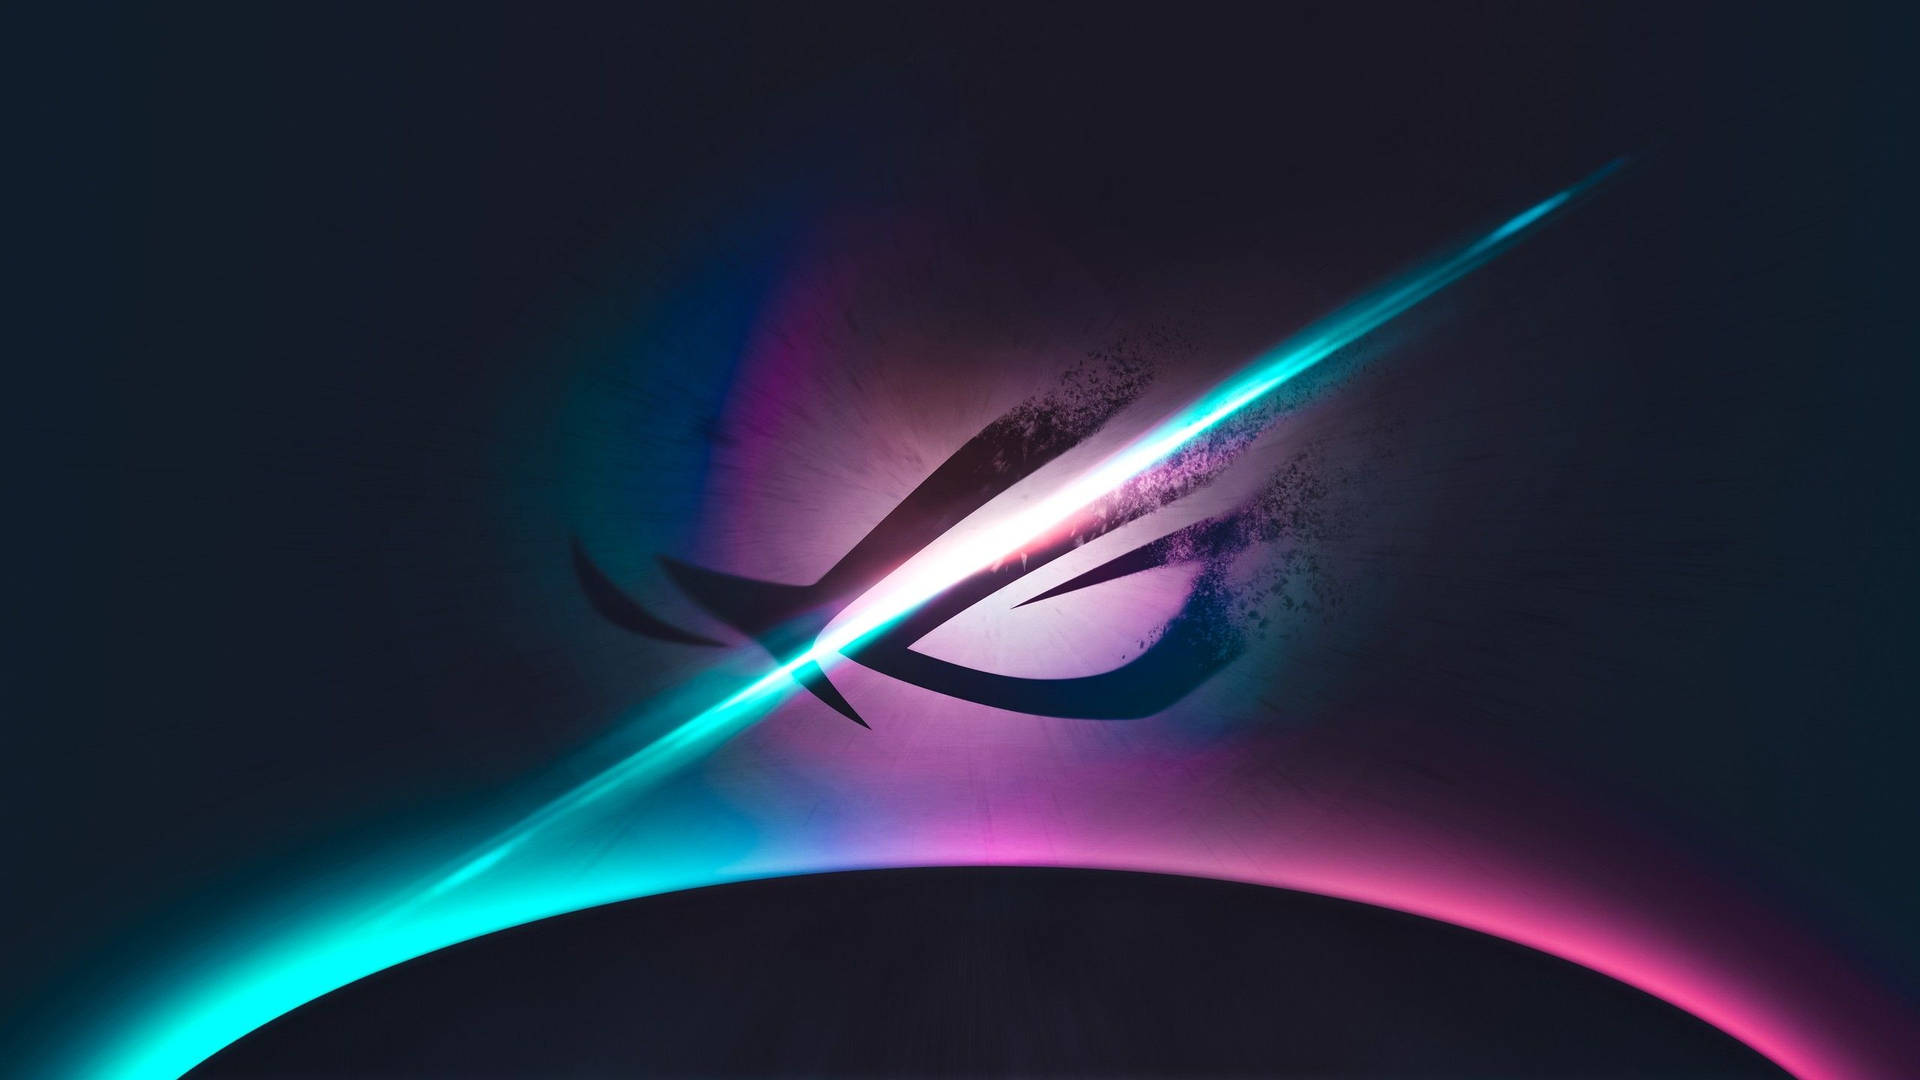 Neon Rog Graphic 1440p Gaming Background Wallpaper